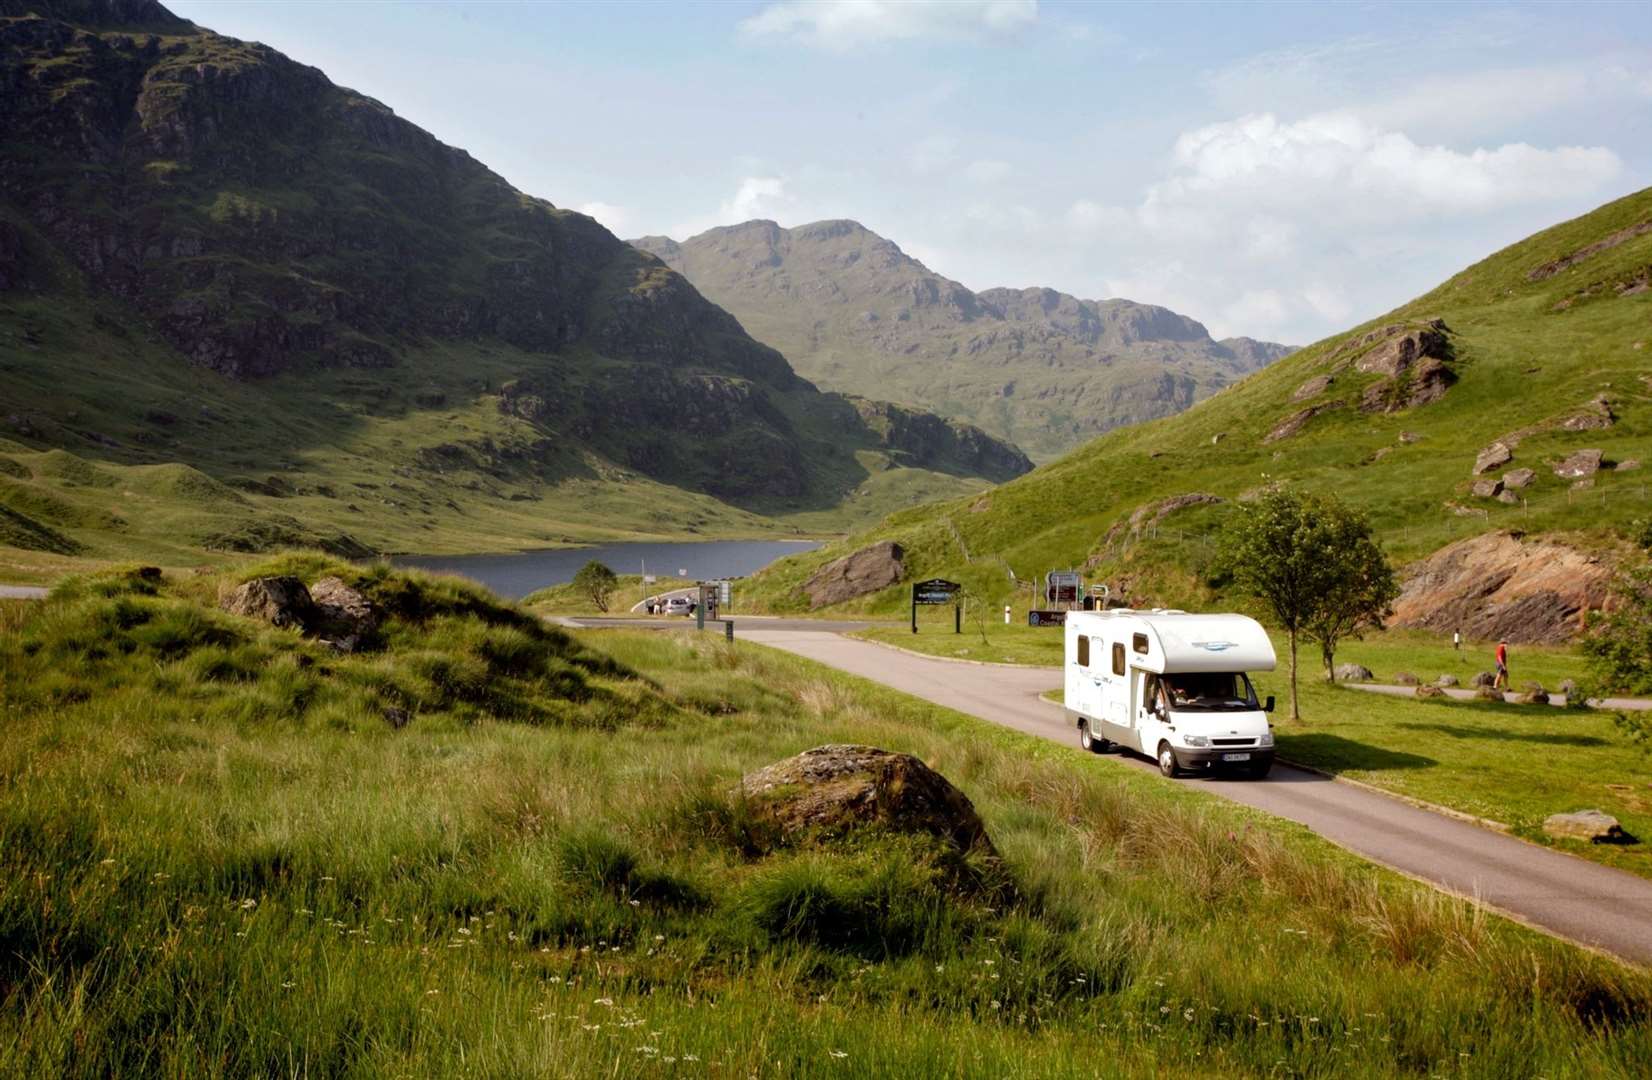 More than £5.8 million in recovery funding from the Scottish Tourism Emergency Response Group (STERG) is to be spent at tourism hotspots nationwide.